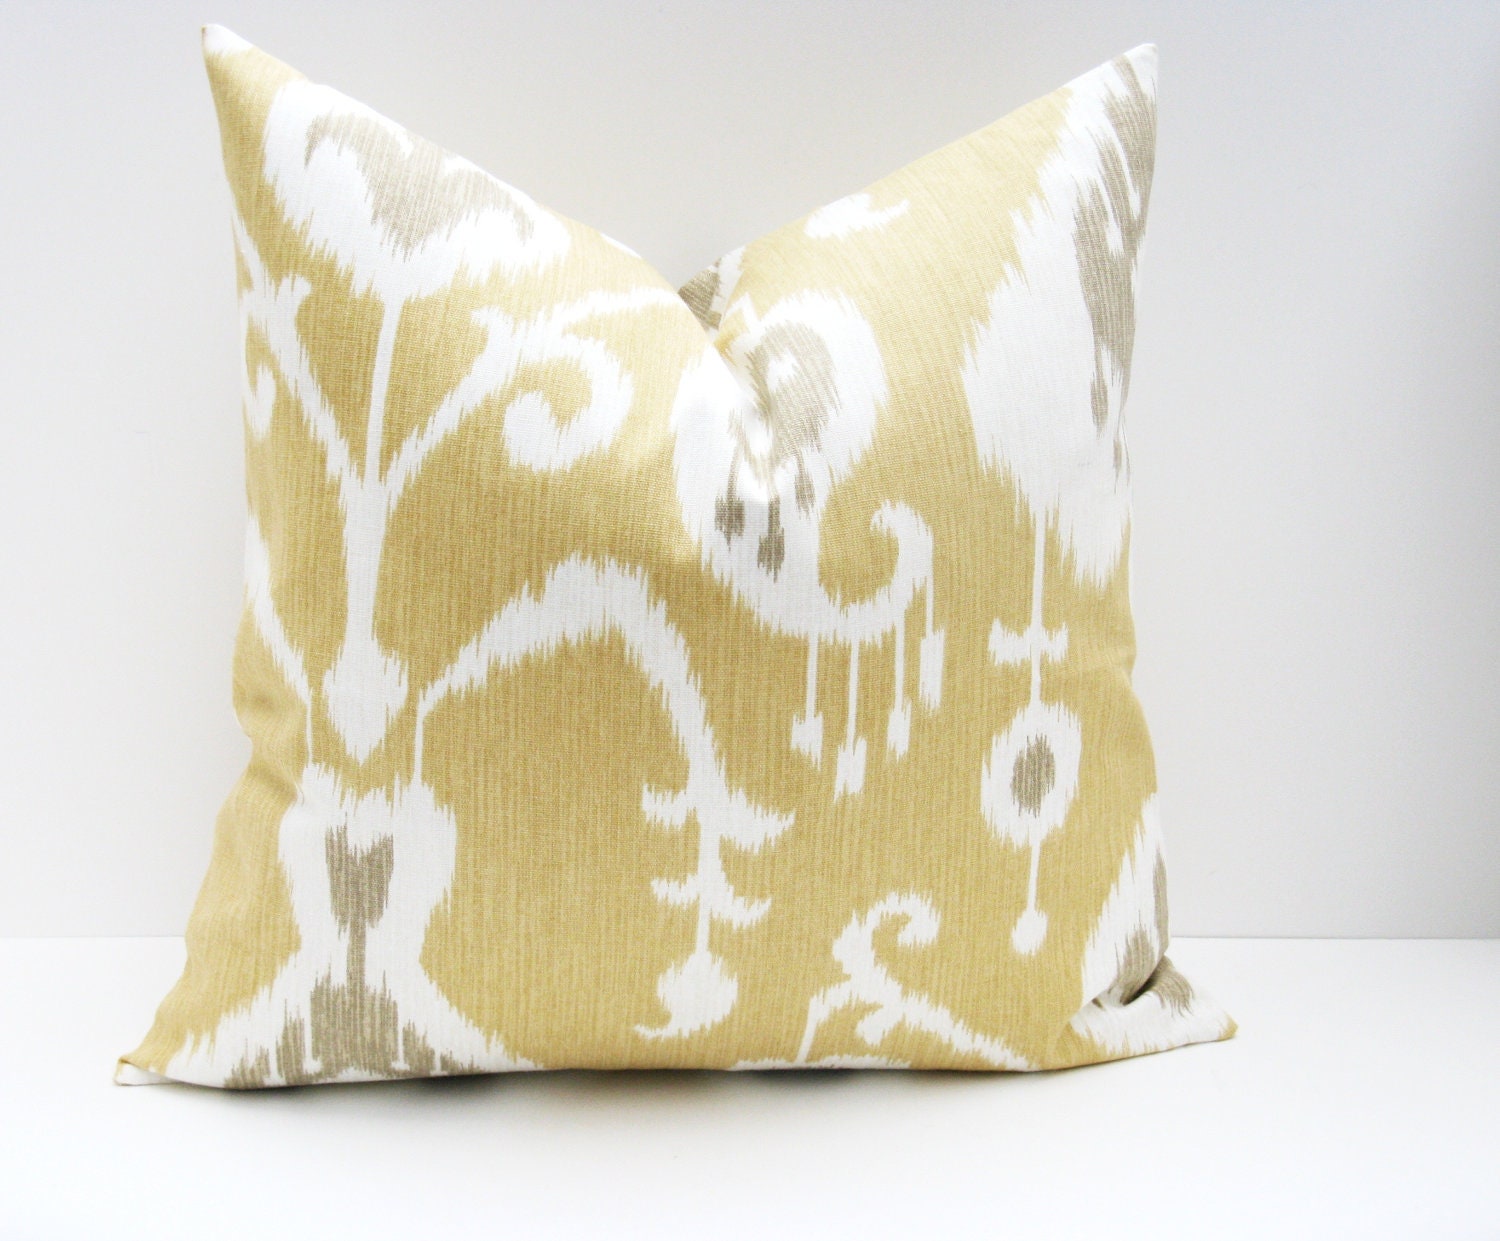 Throw Pillow Cover. Decorative Throw Pillows. 18x18 pillow covers. Tan Ikat Pillow ONE 18x18 printed fabric on front and back